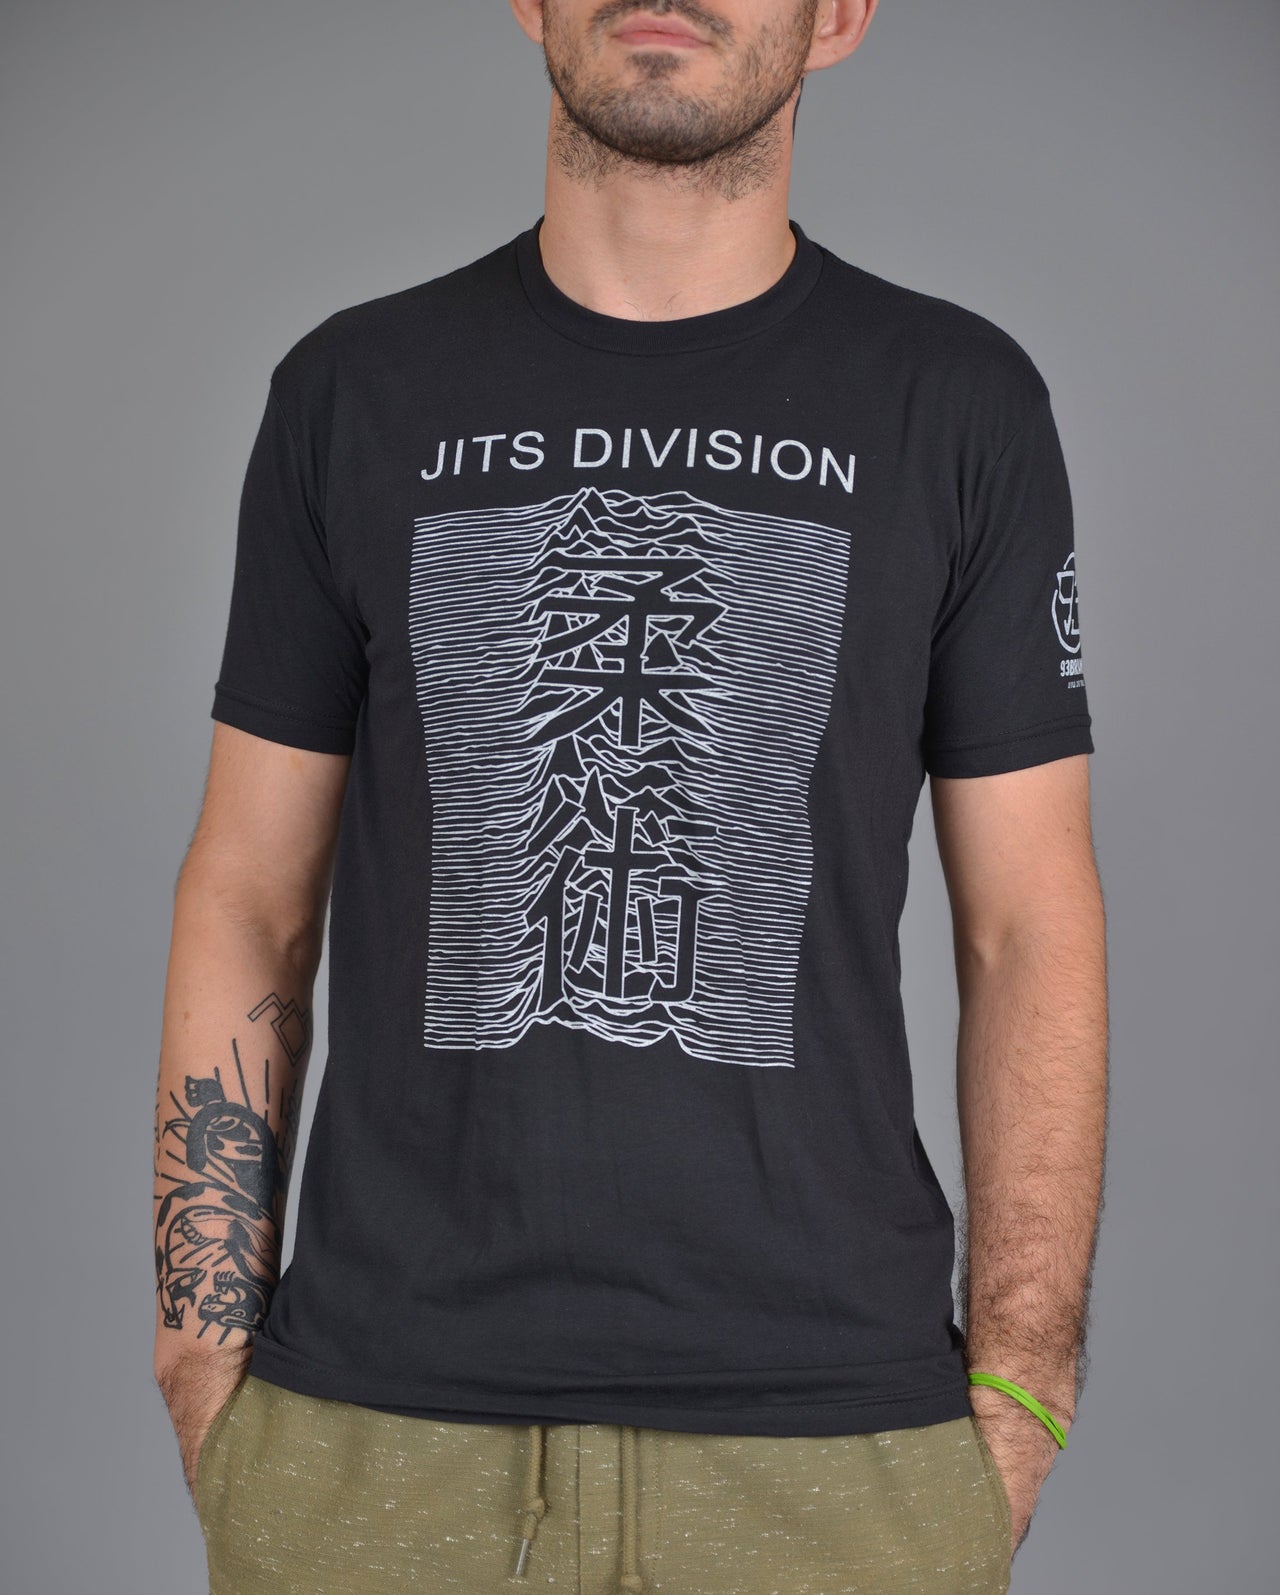 93brand "DIVISION" Tee